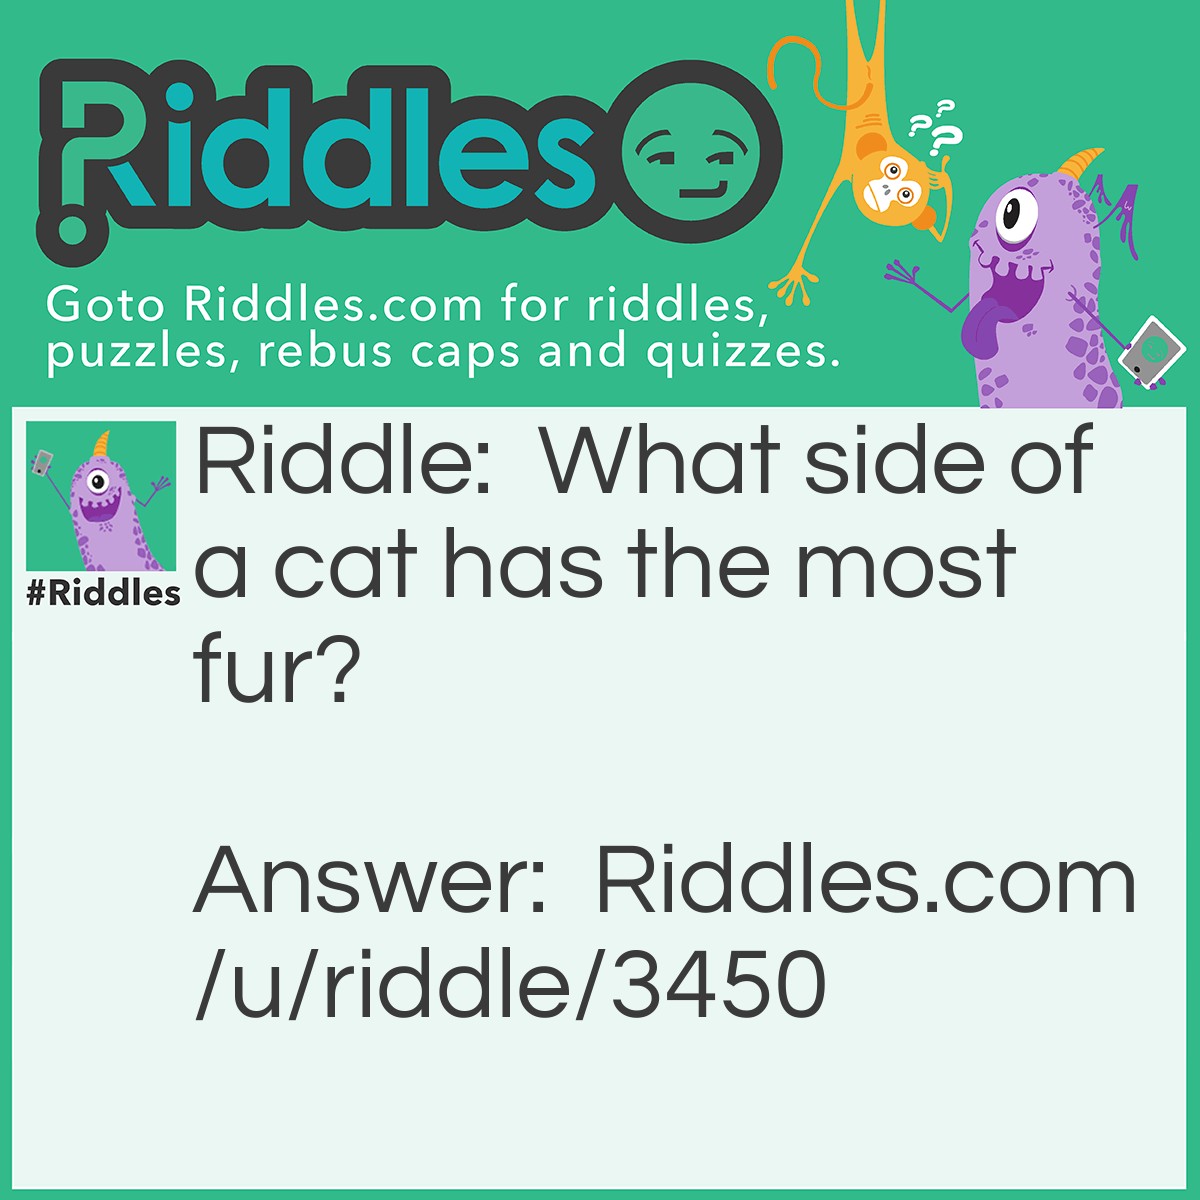 Riddle: What side of a cat has the most fur? Answer: The outside.